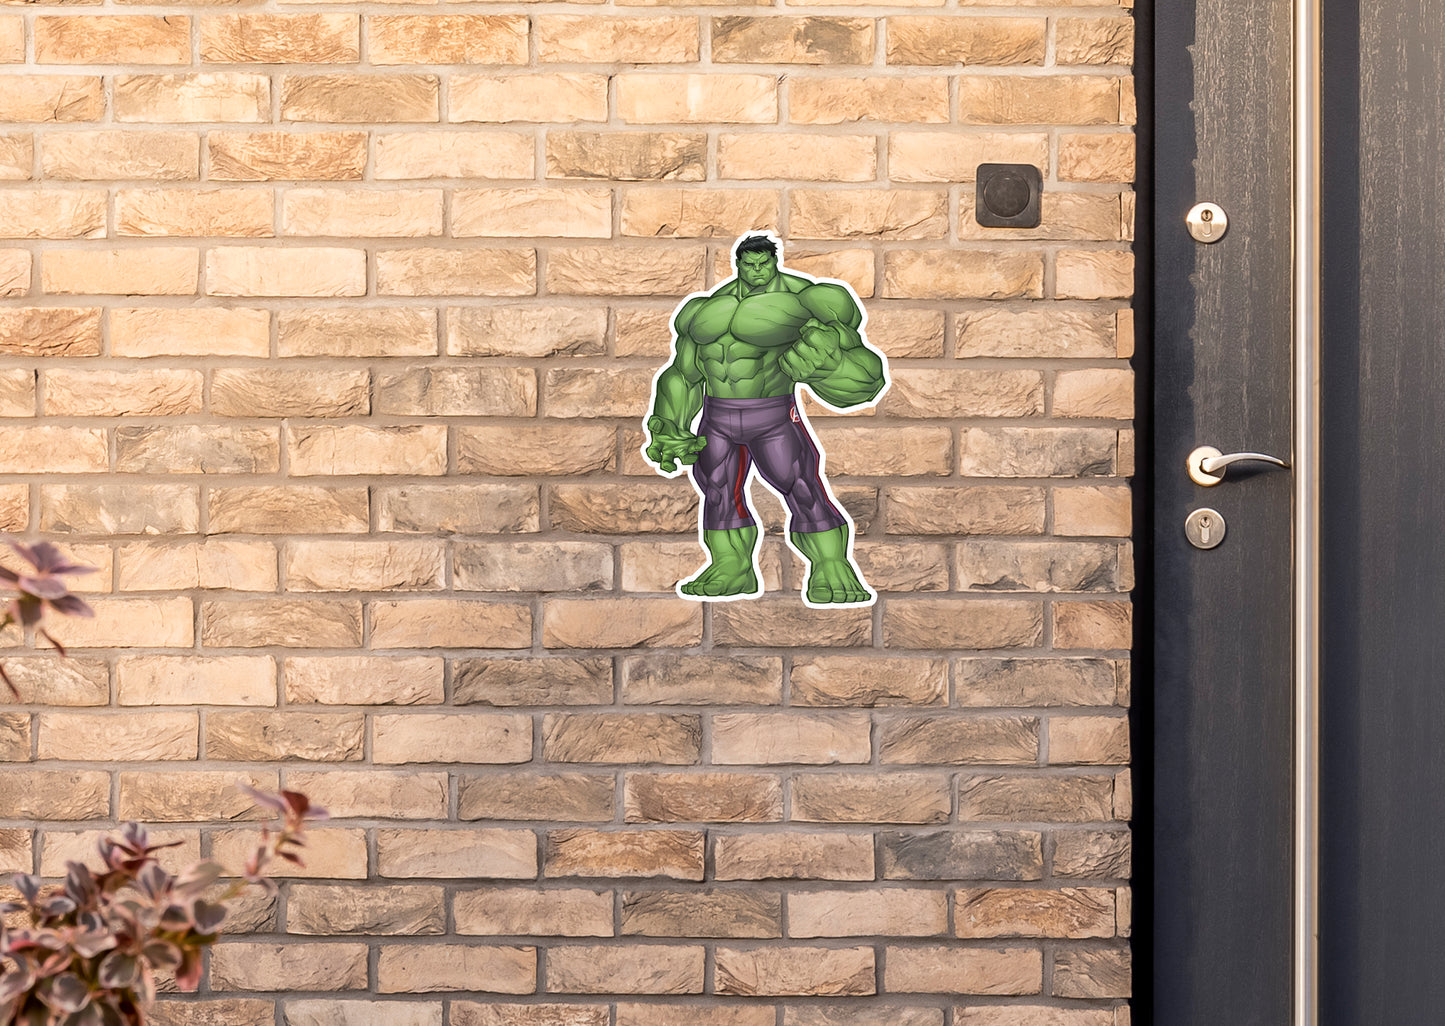 Incredible Hulk: Incredible Hulk Posing        - Officially Licensed Marvel    Outdoor Graphic